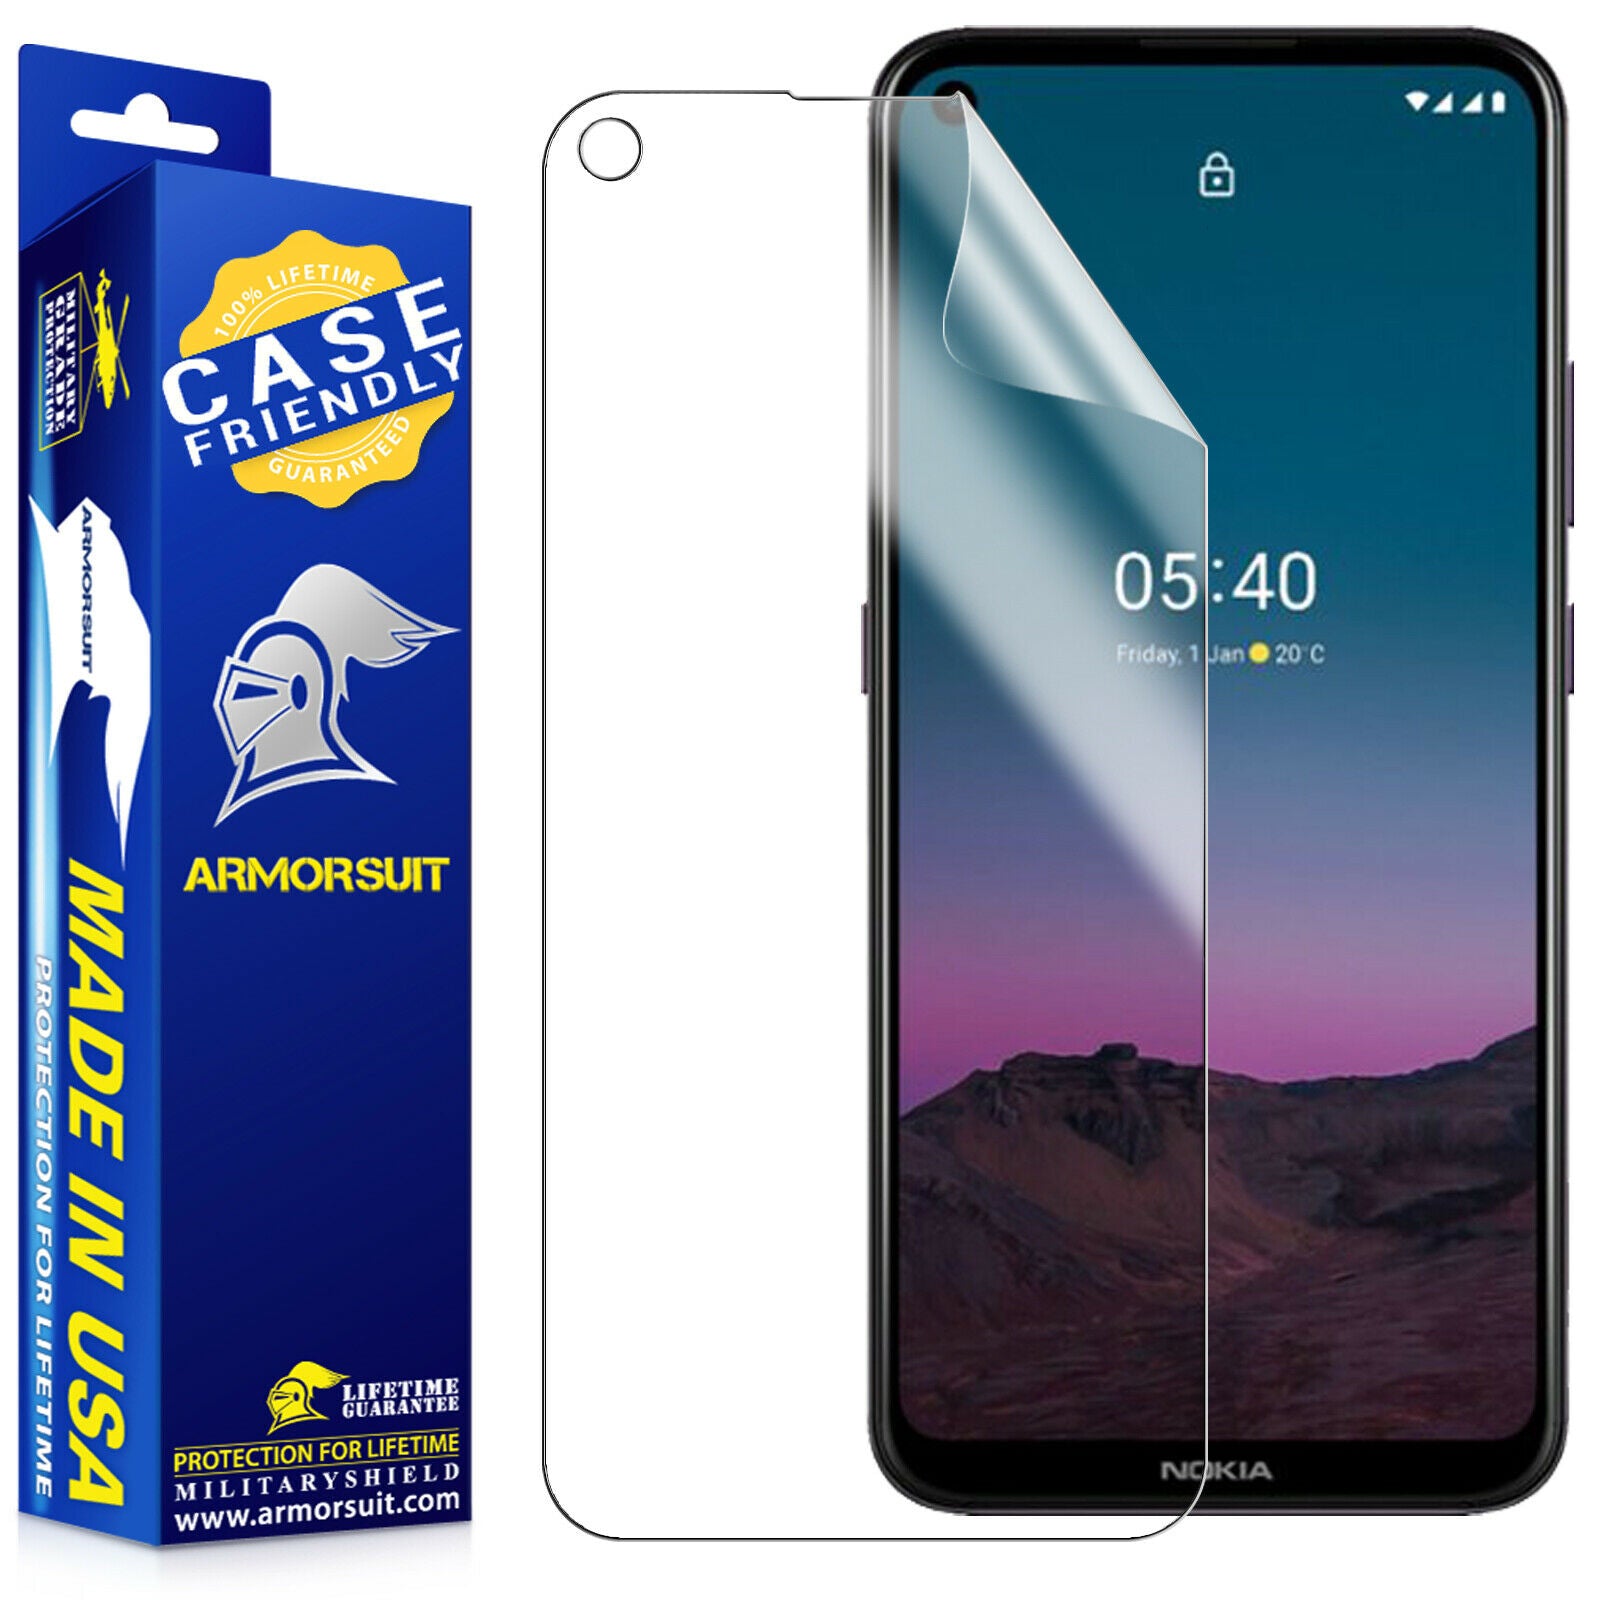 [2 Pack] Nokia 5.4 (2021) Screen Protector - Case-Friendly